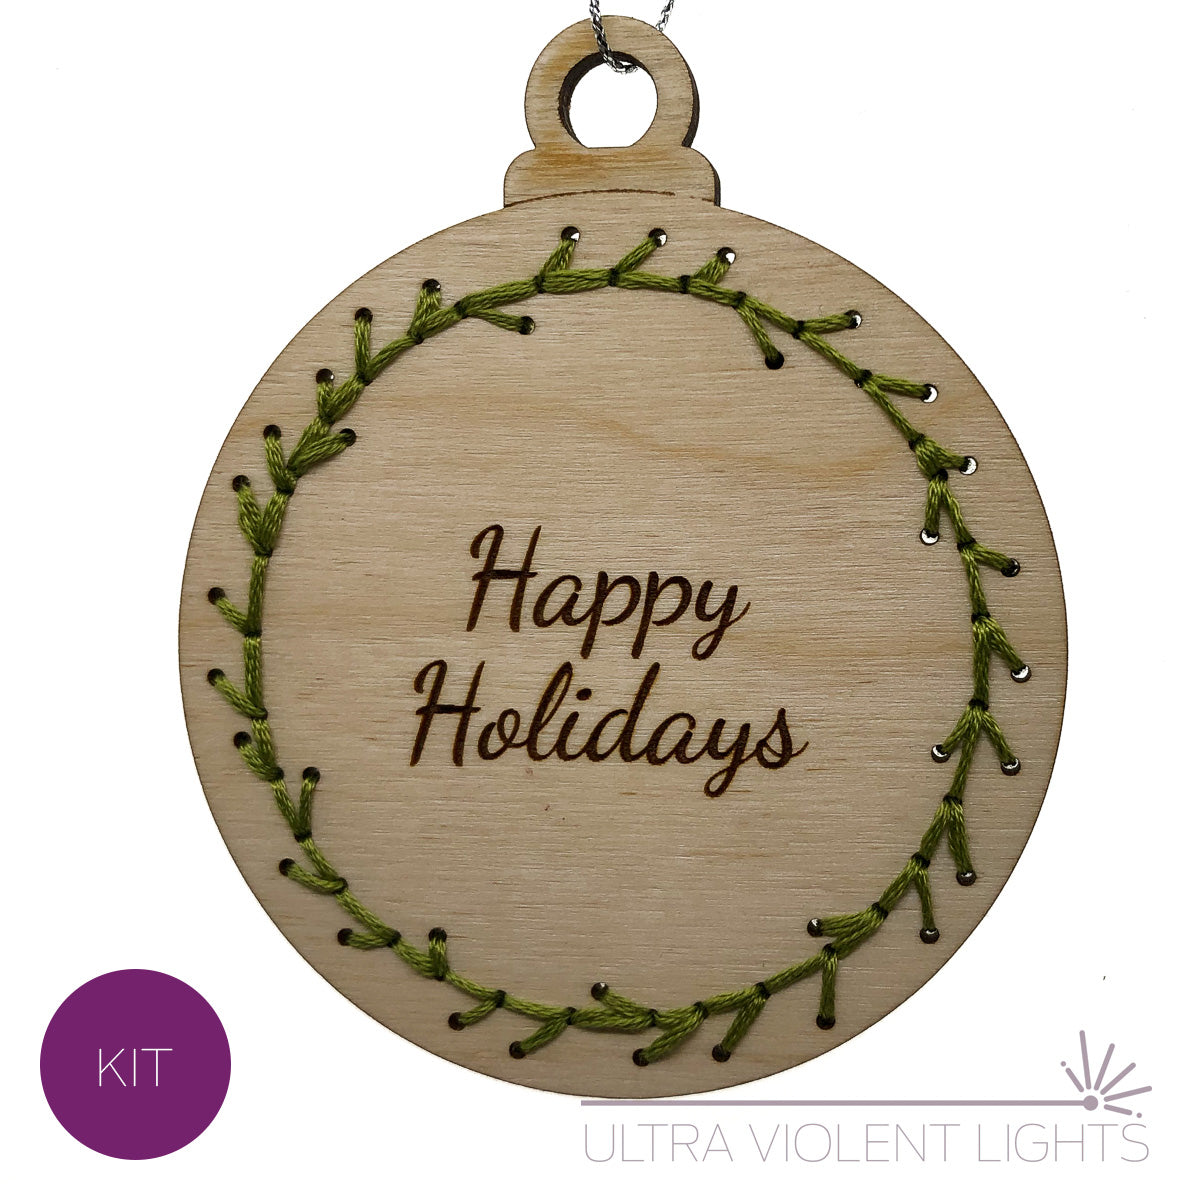 Happy Holidays on a wooden ornament embroidered with green floss